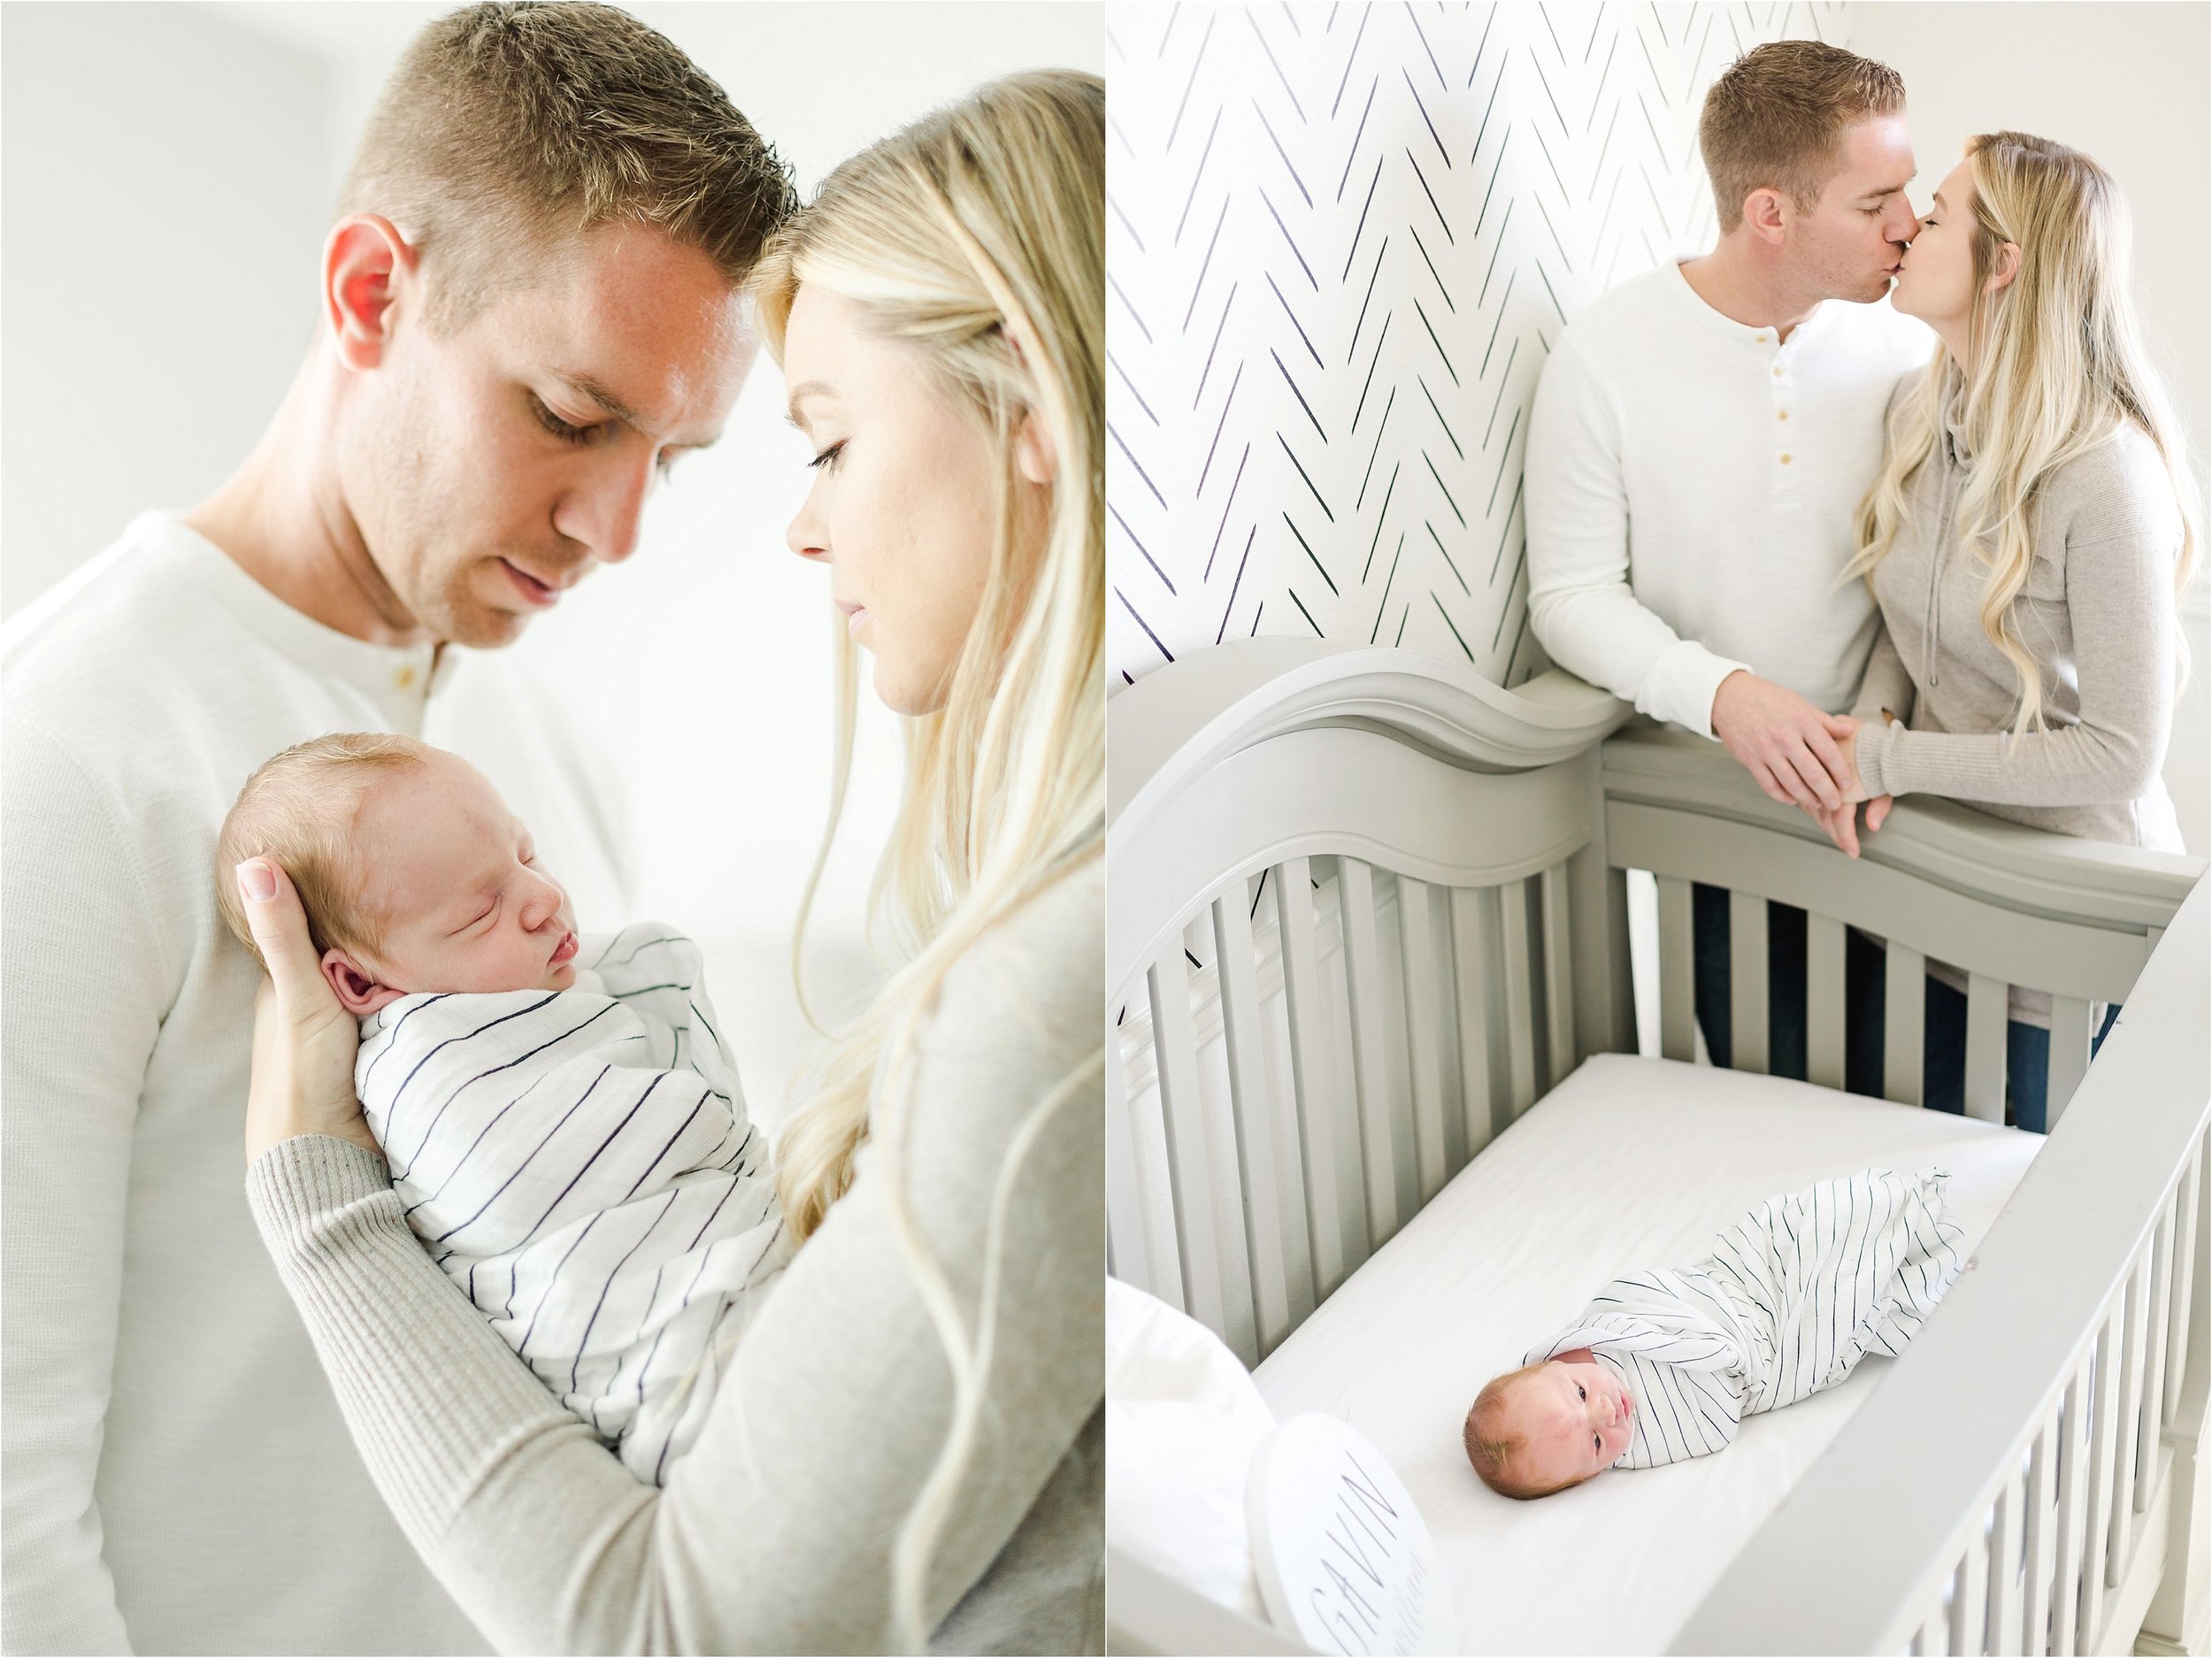 Baby boy is snuggled between his mother and father while sleeping.  Image on the right shows baby boy in his crib while Mother and Father kiss.